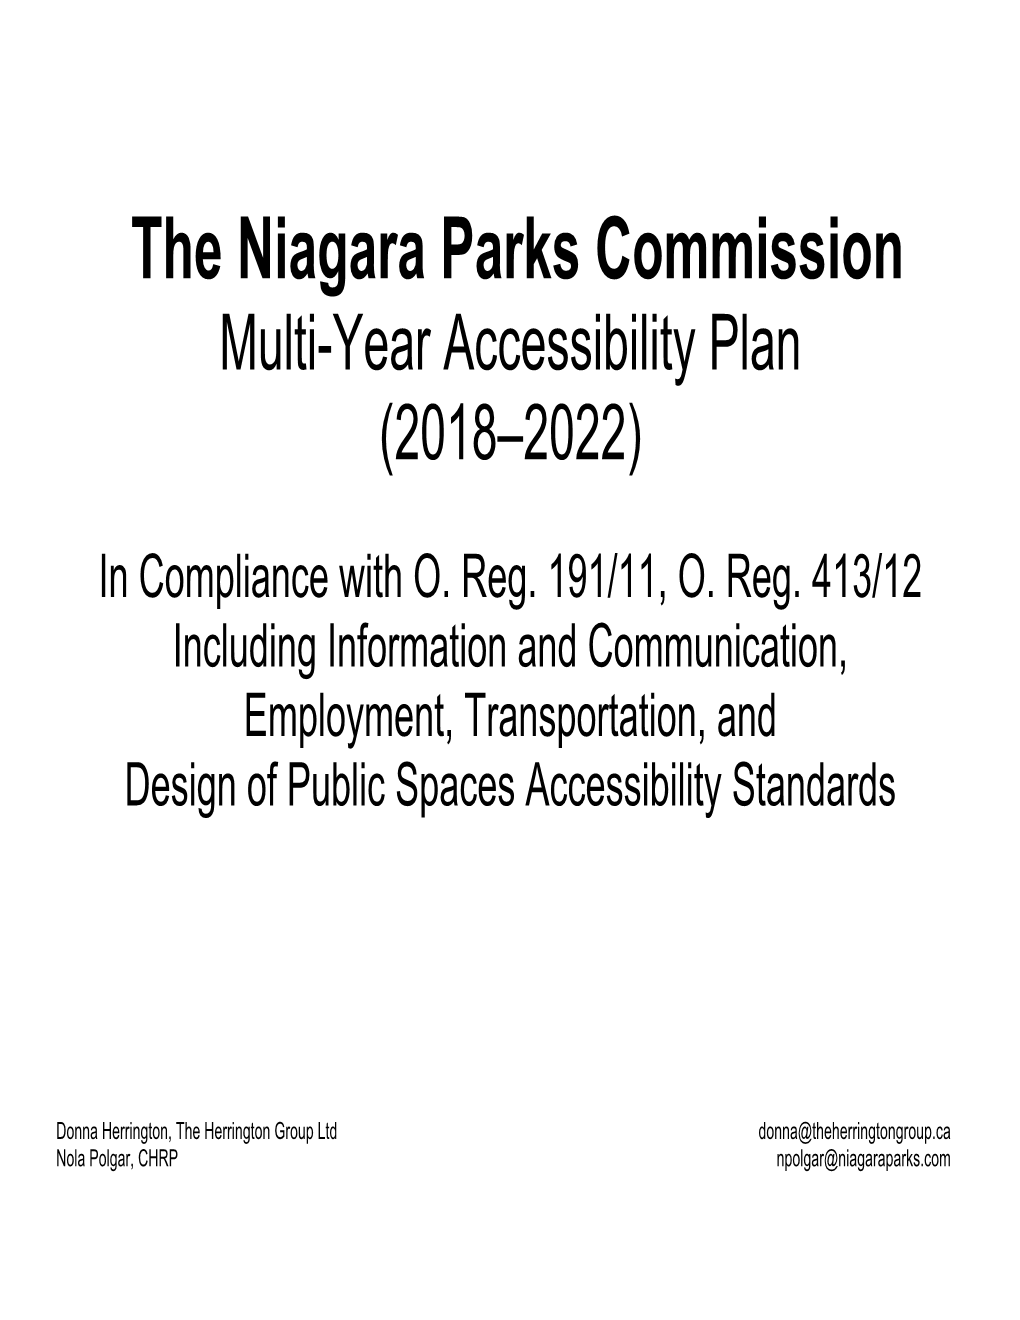 The Niagara Parks Commission Internal Version Multi-Year